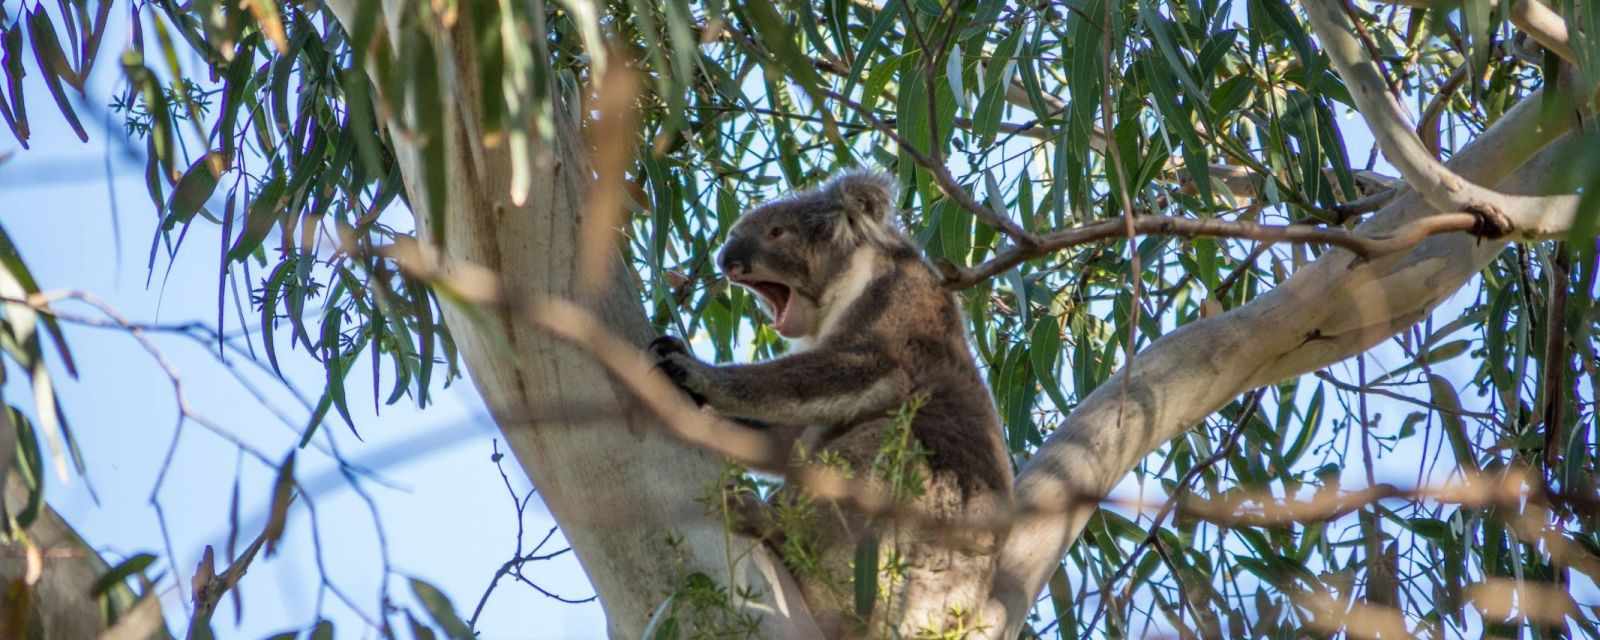 Where to Spot Koalas Along the Great Ocean Road - Location and 9 Facts